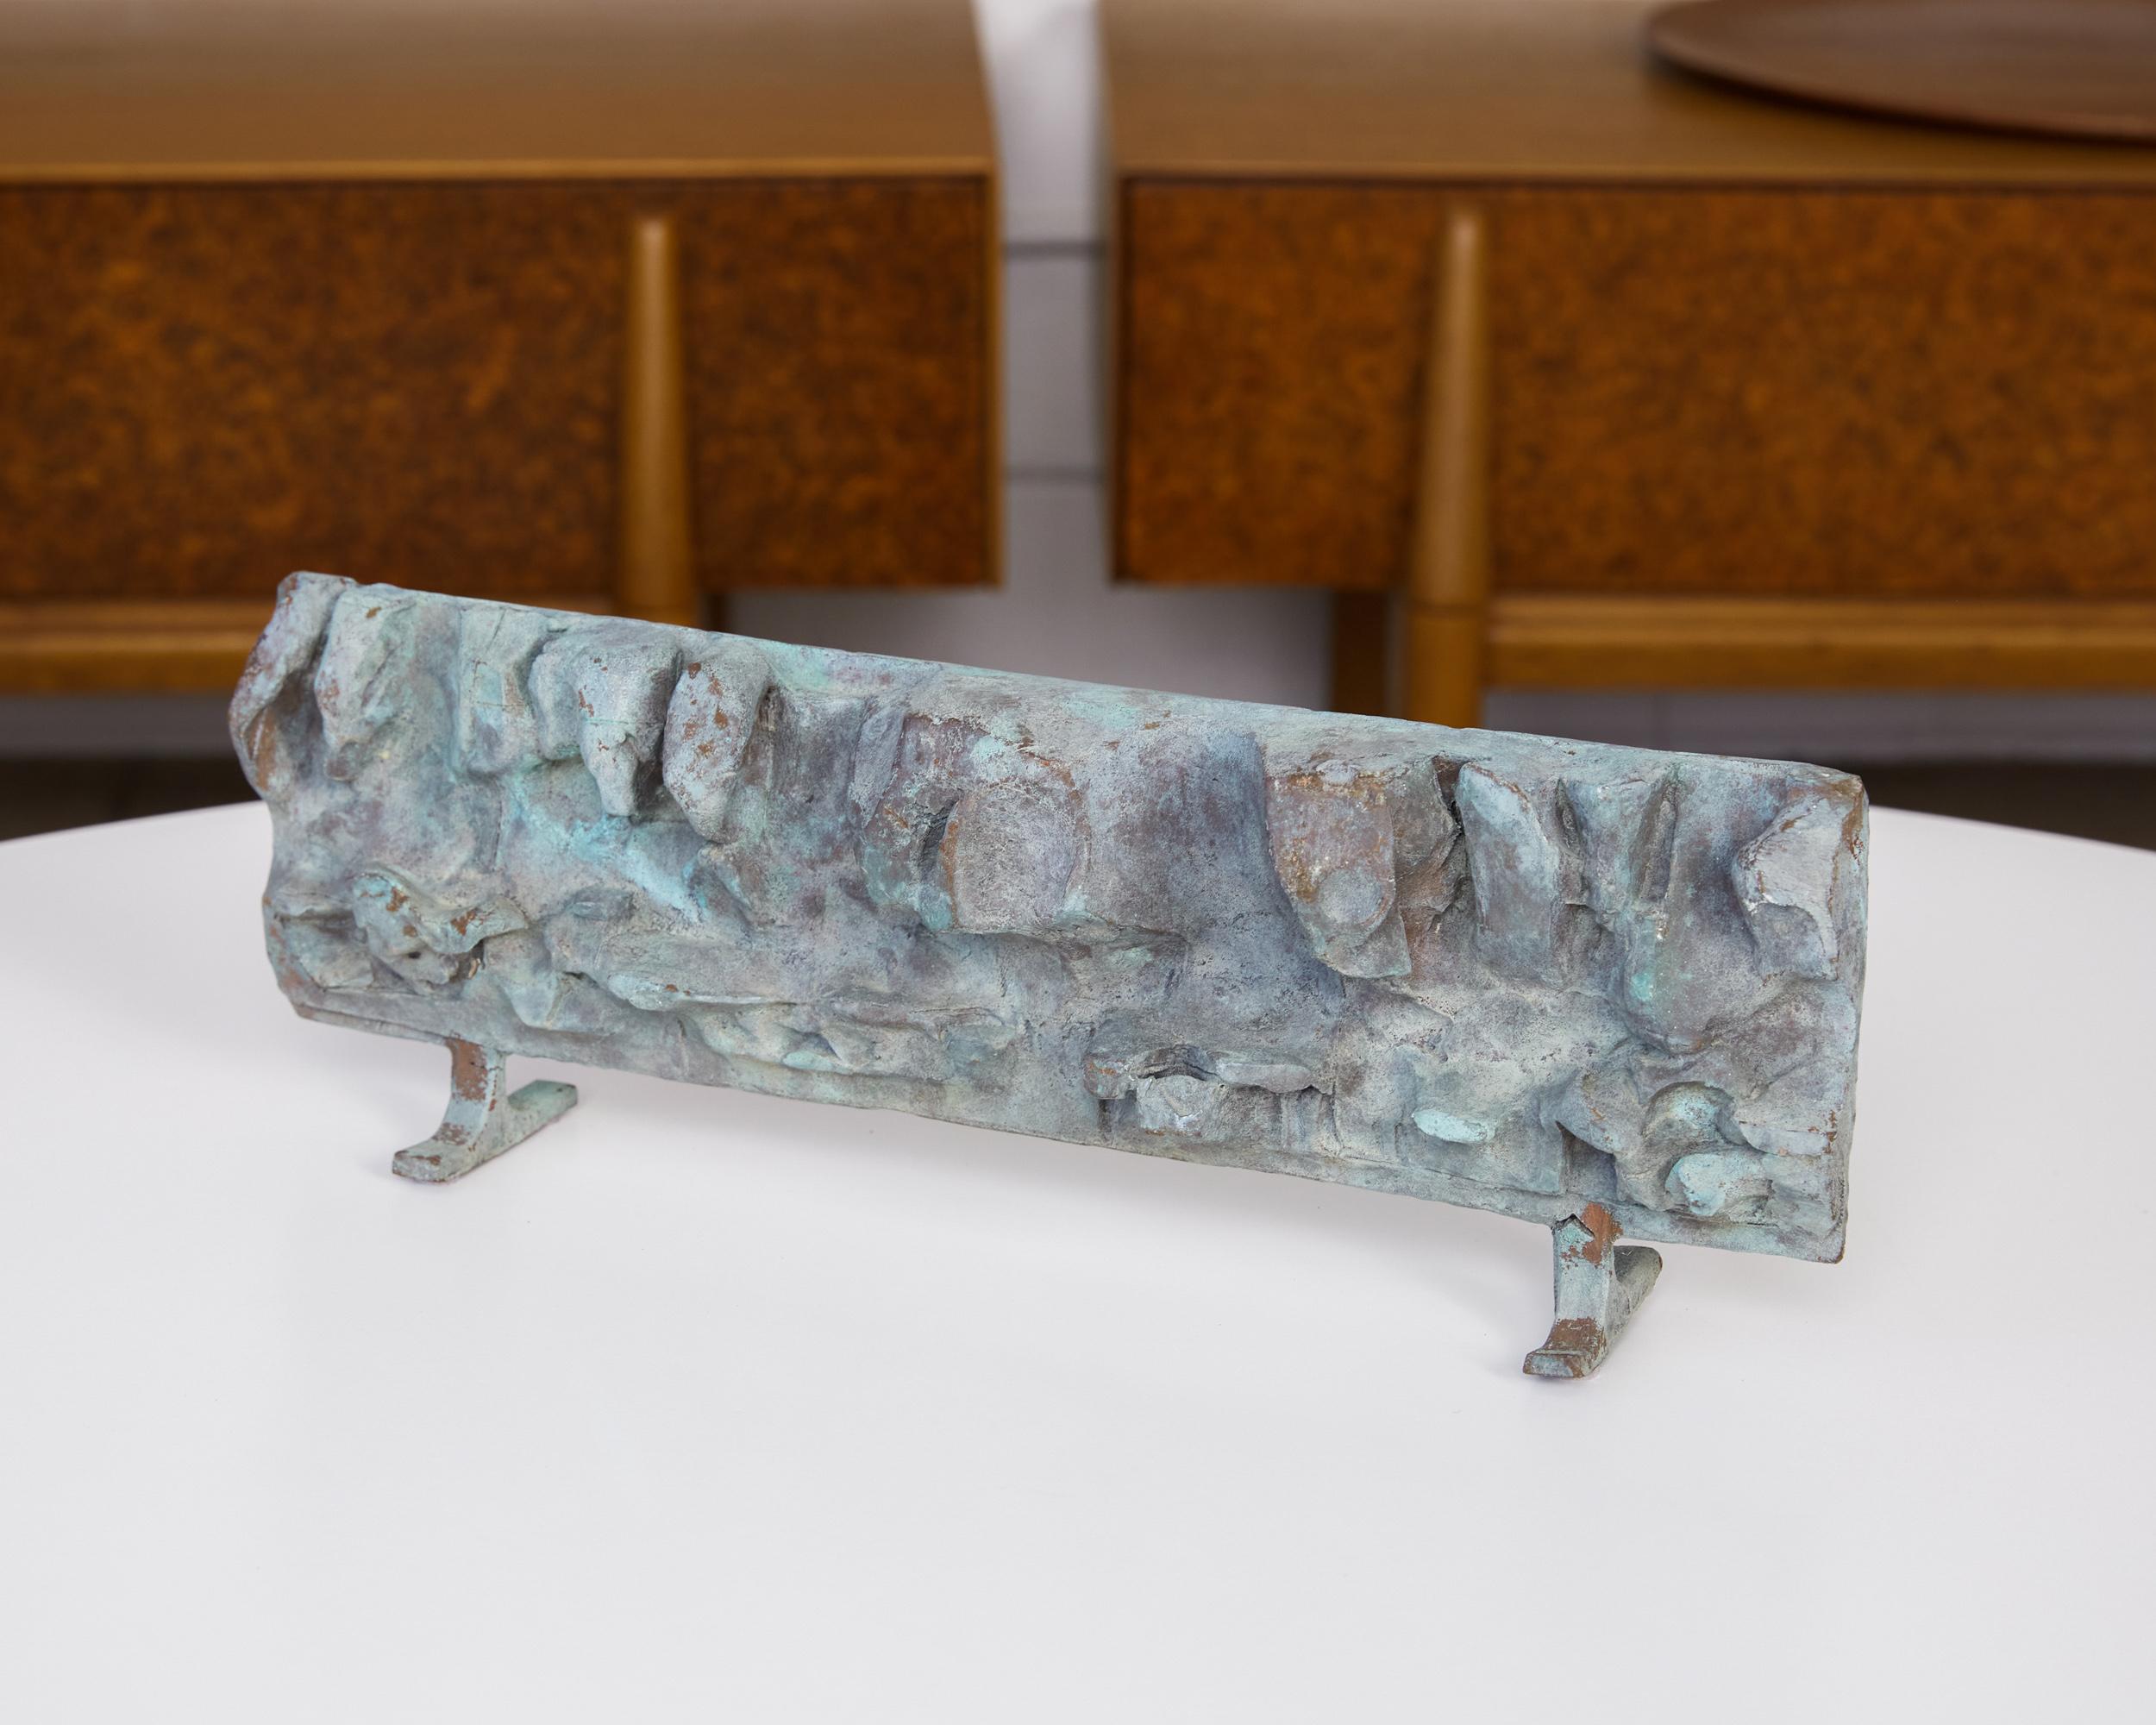 Cast bronze abstract sculpture with verdigris patina. This textured horizontal sculpture sits atop two petite perpendicular flat bar feet. It looks to be a smaller representation of a larger work, perhaps a maquette for a large sculpture or